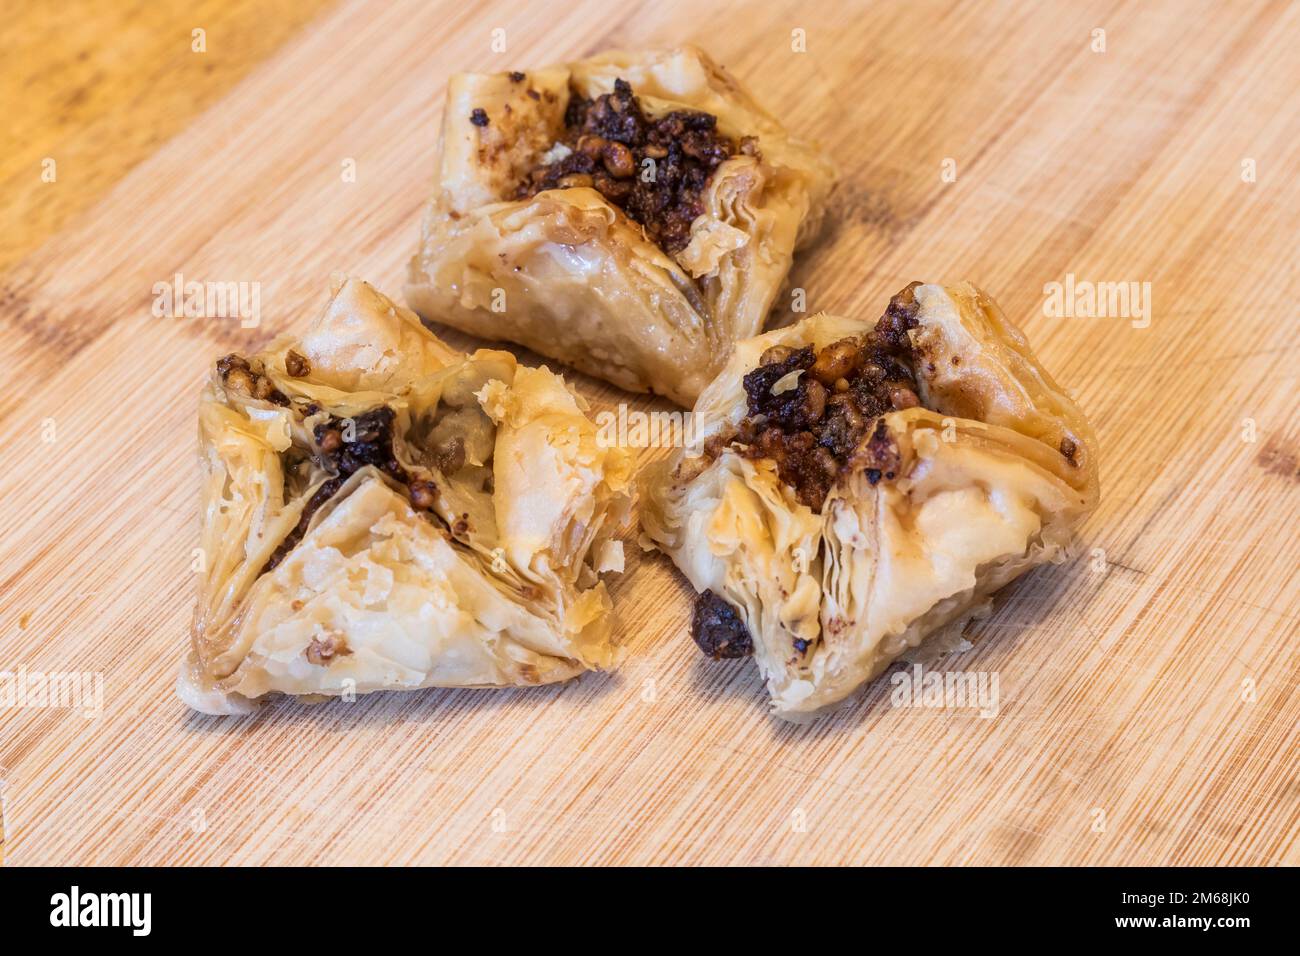 A sweet treat of Baklava, made from layers of filo pastry Stock Photo